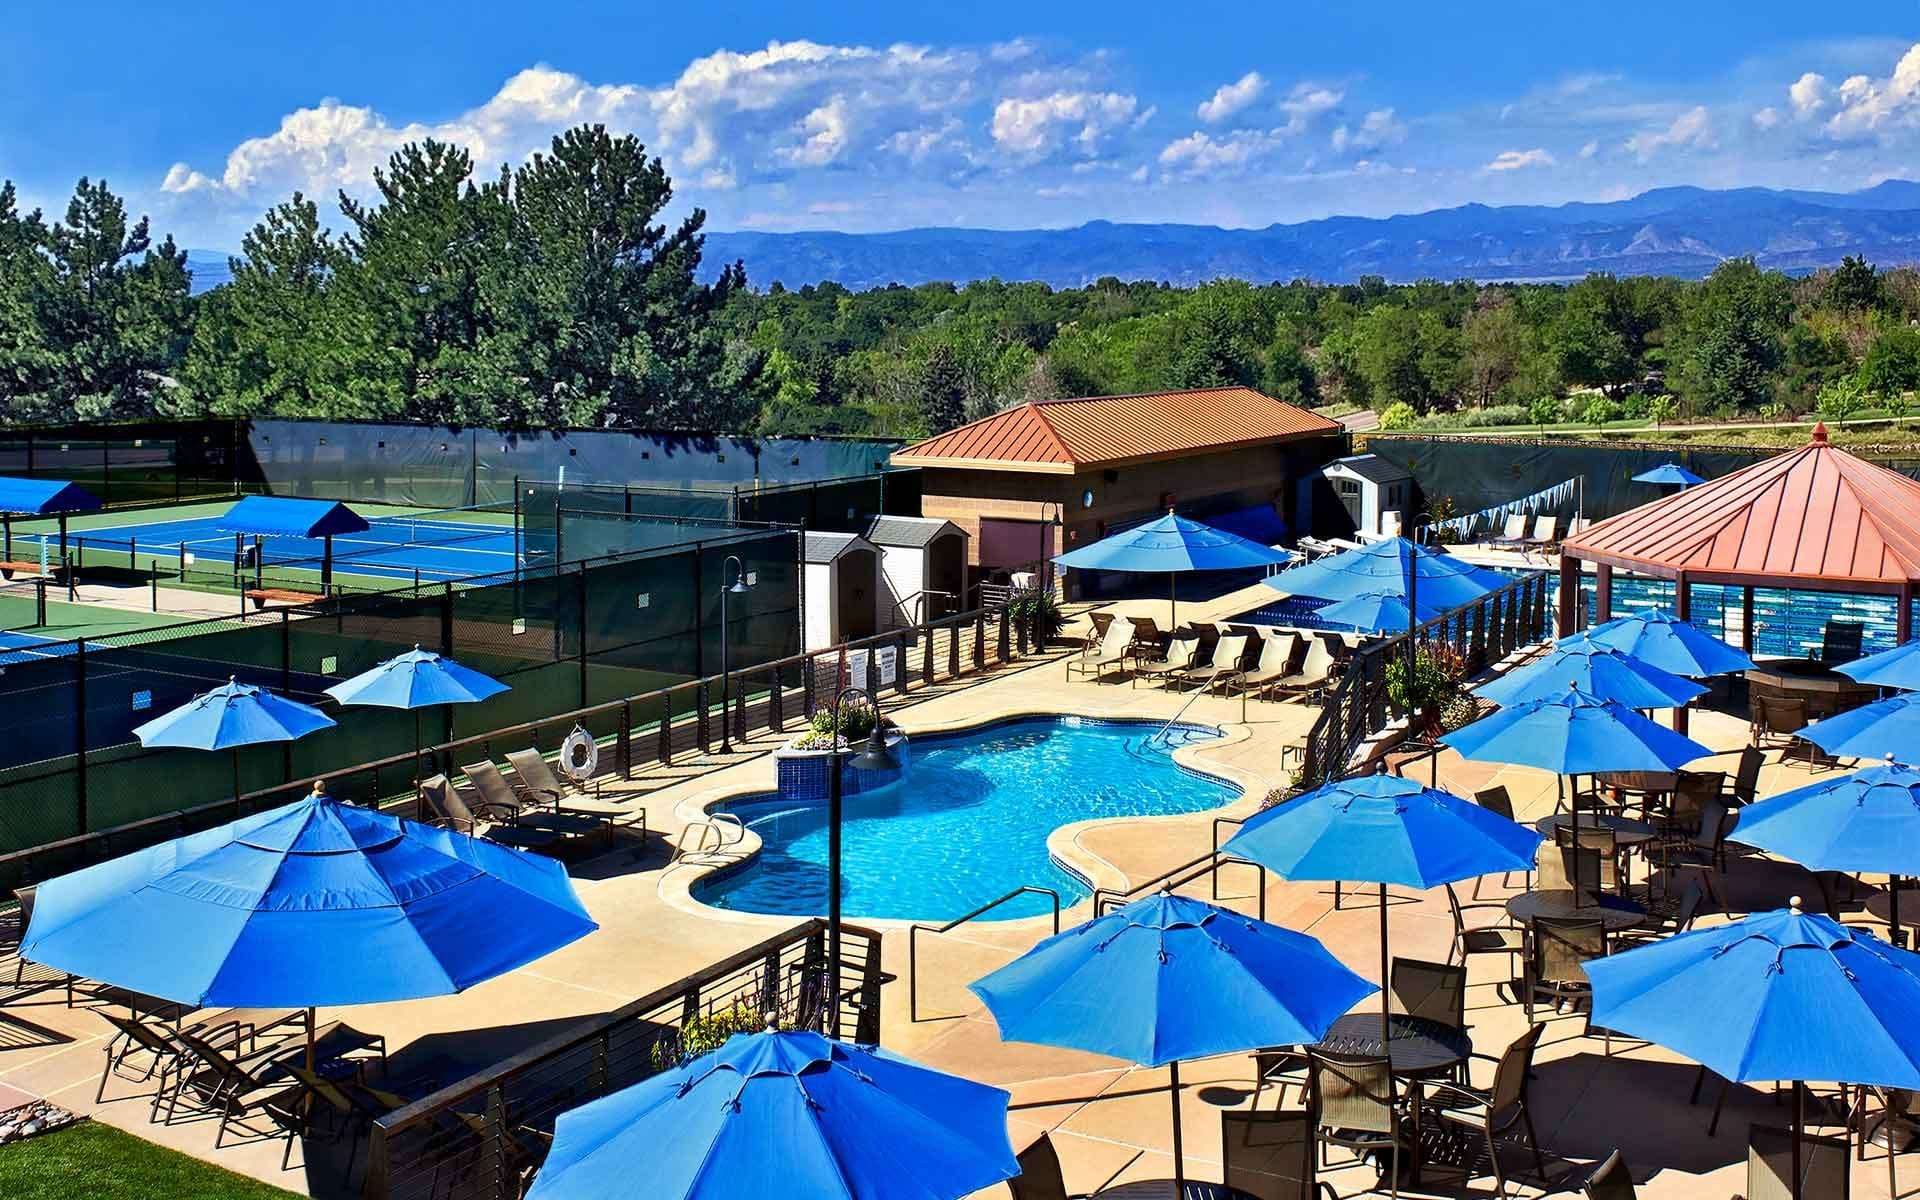 outdoor pool and tennis courts with umbrellas and mountains in the background